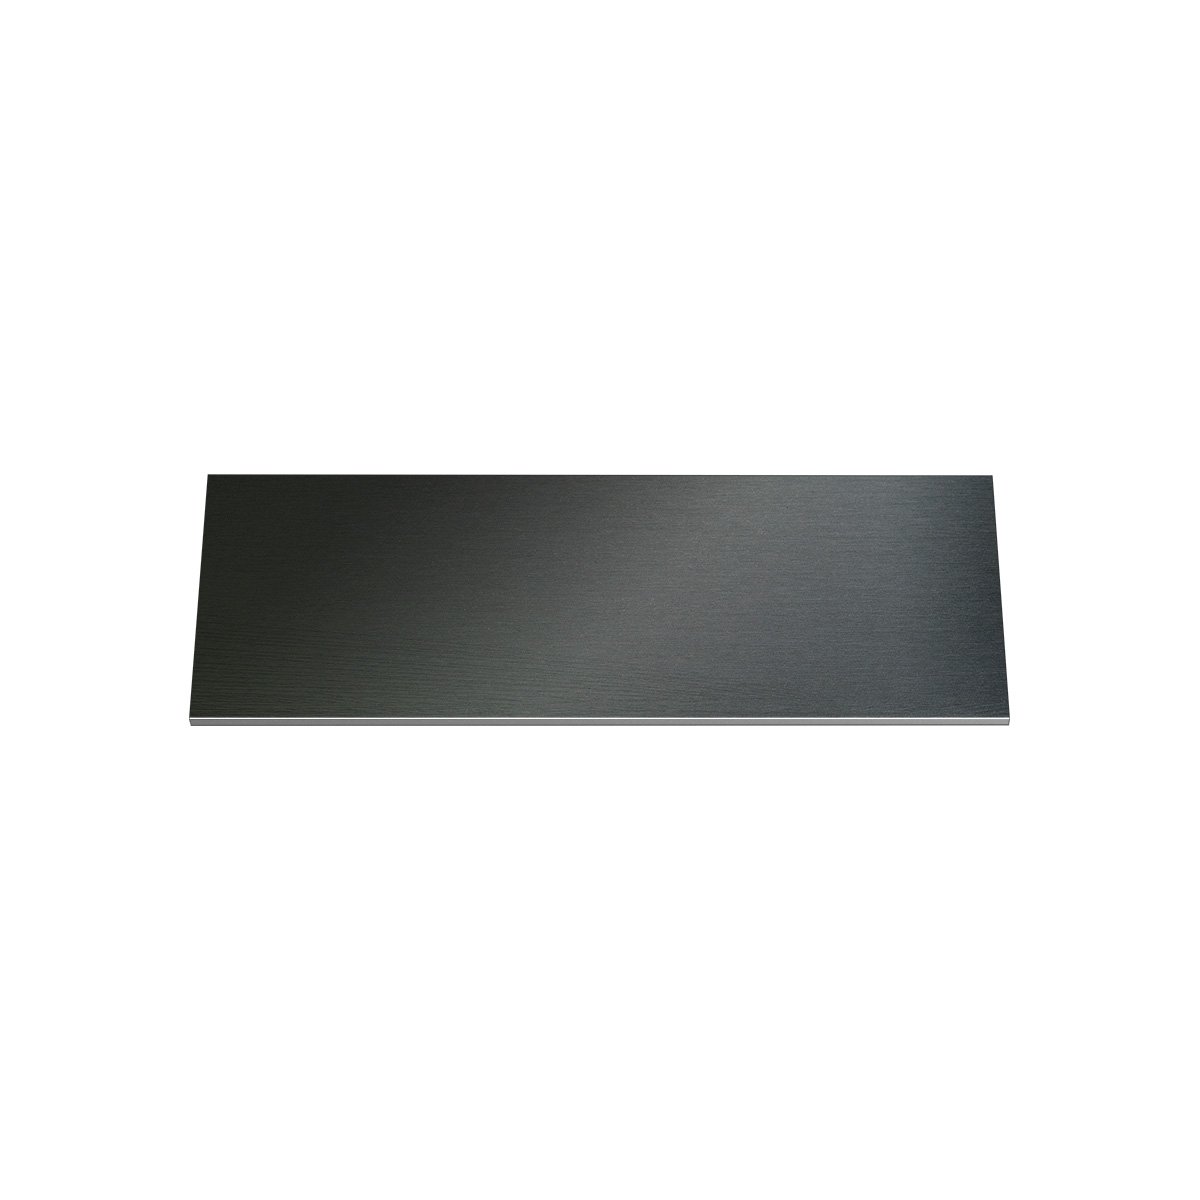 Engraving plate, black aluminum, rectangular, 70 x 25 mm, with adhesive, no hole